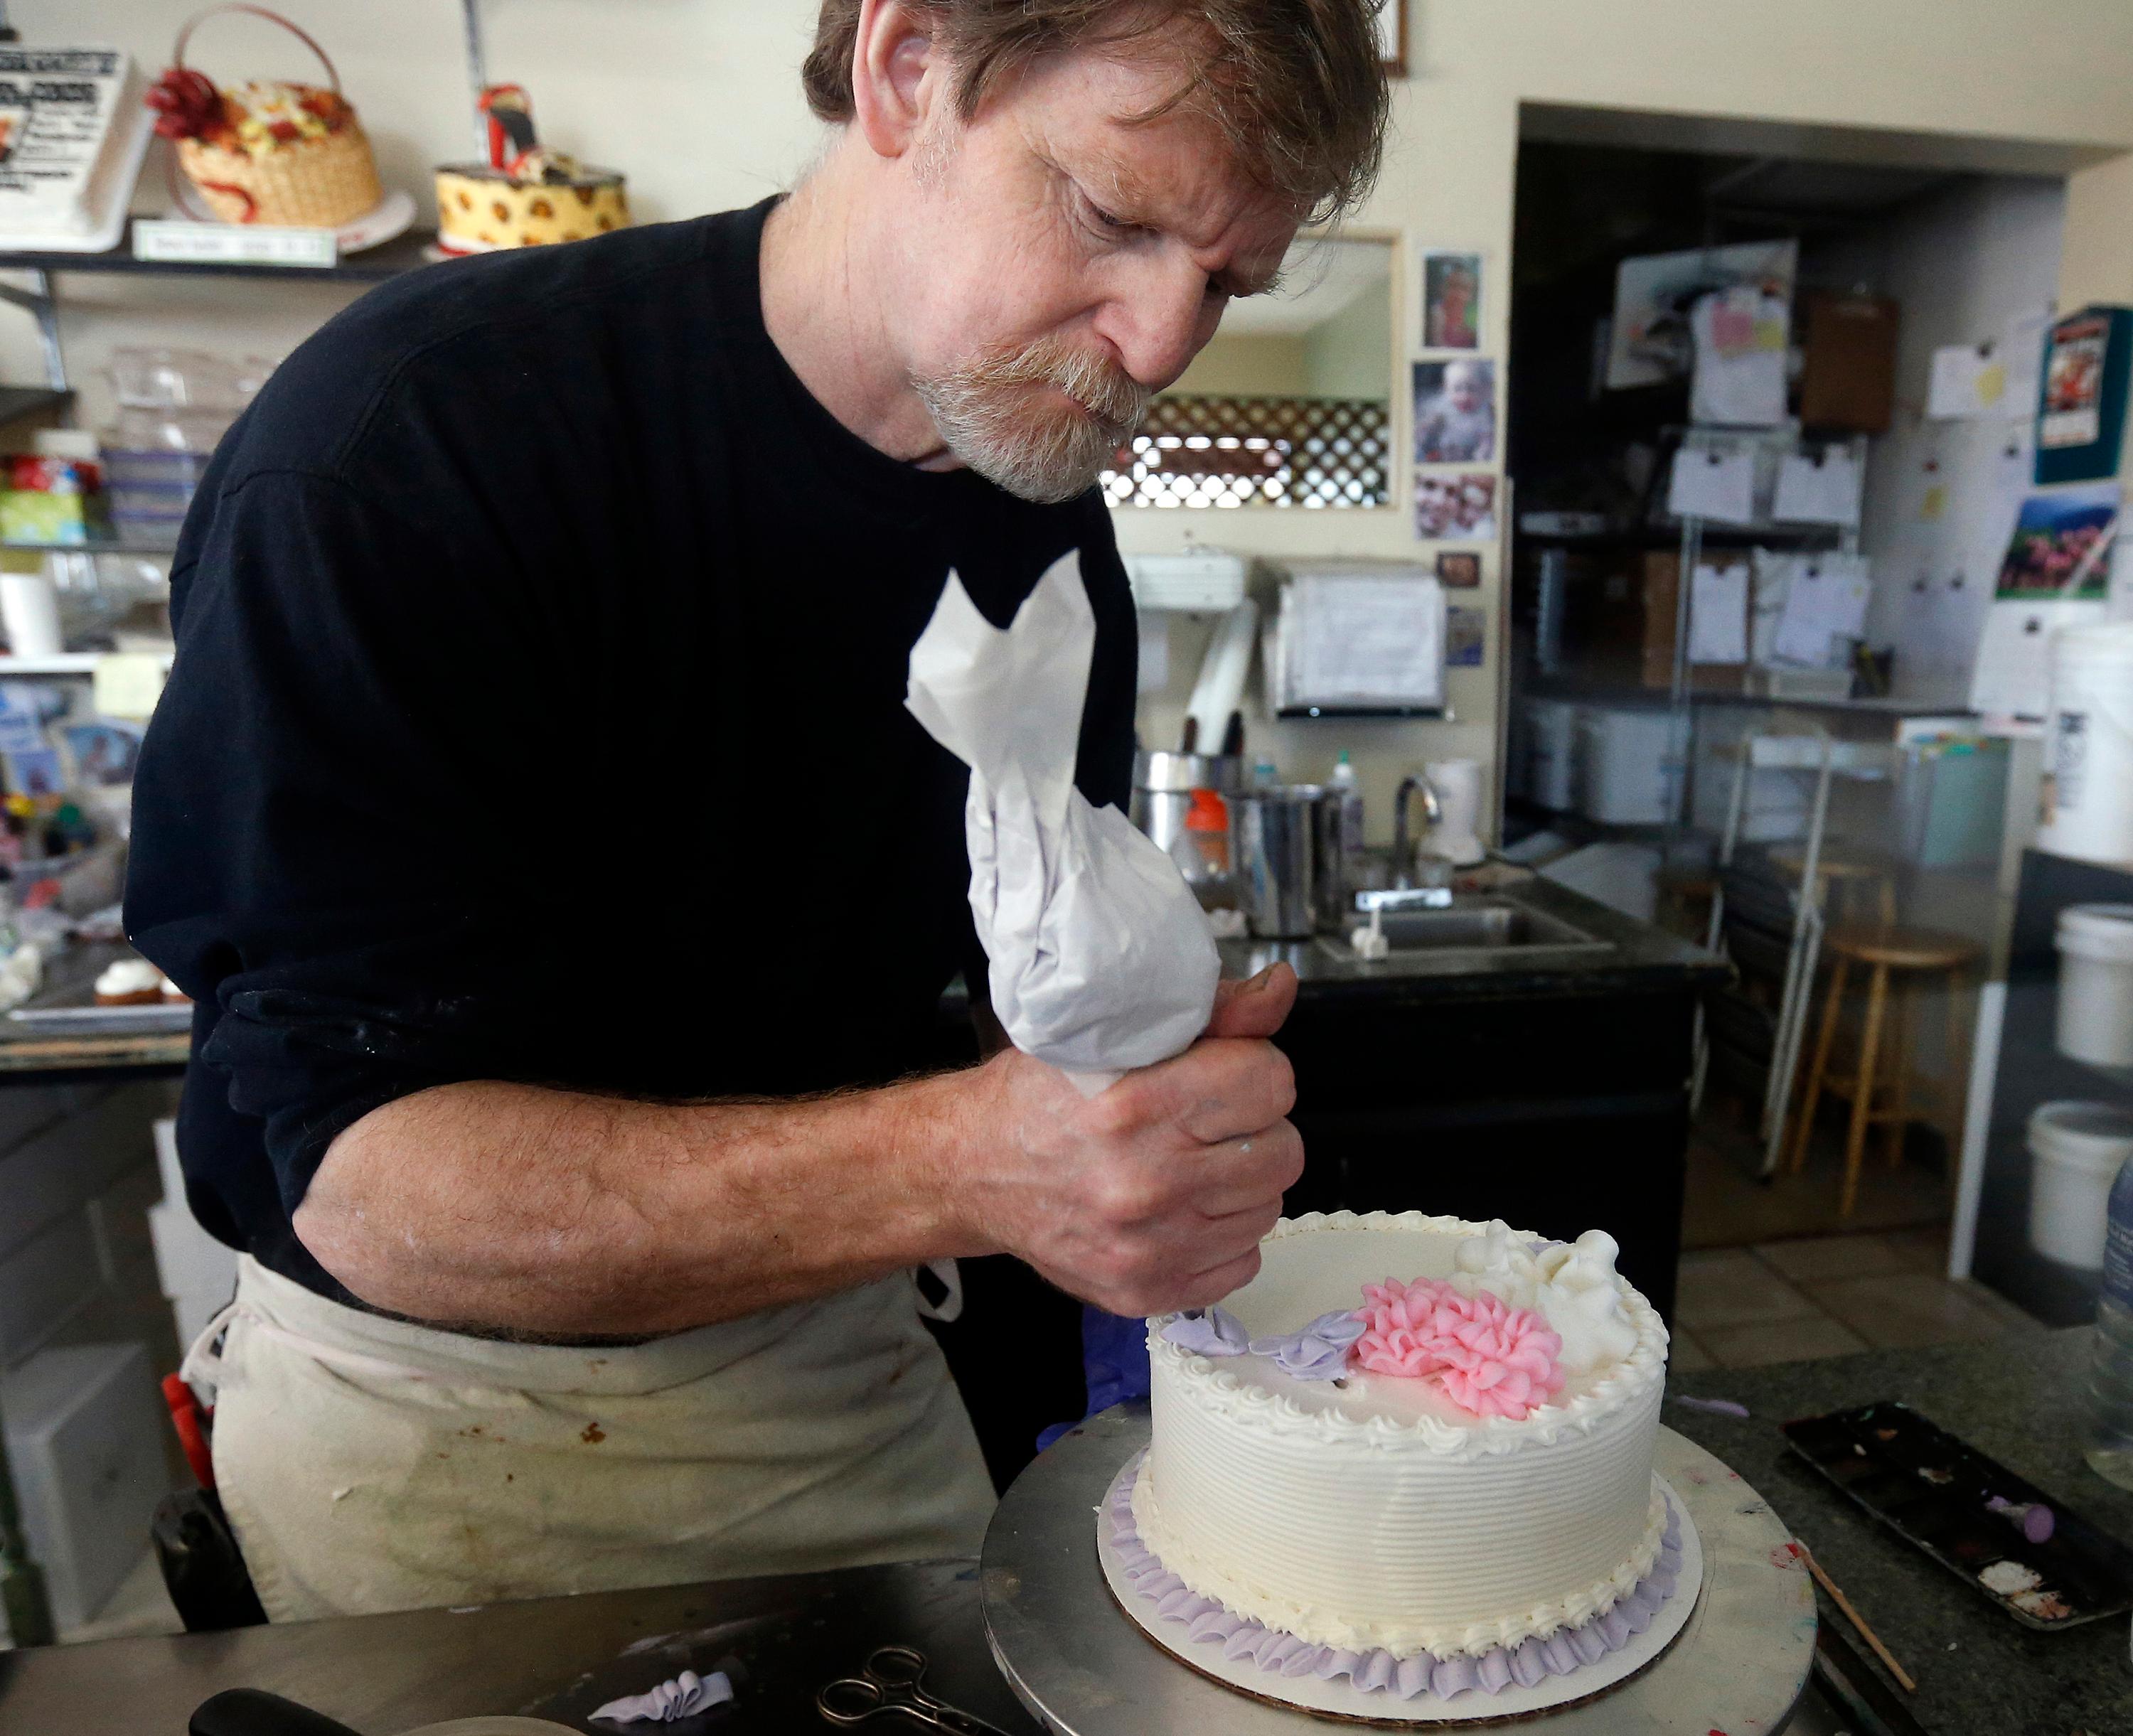 Photo: Masterpiece Cakeshop owner Jack Phillips decorates a cake March 10, 2014